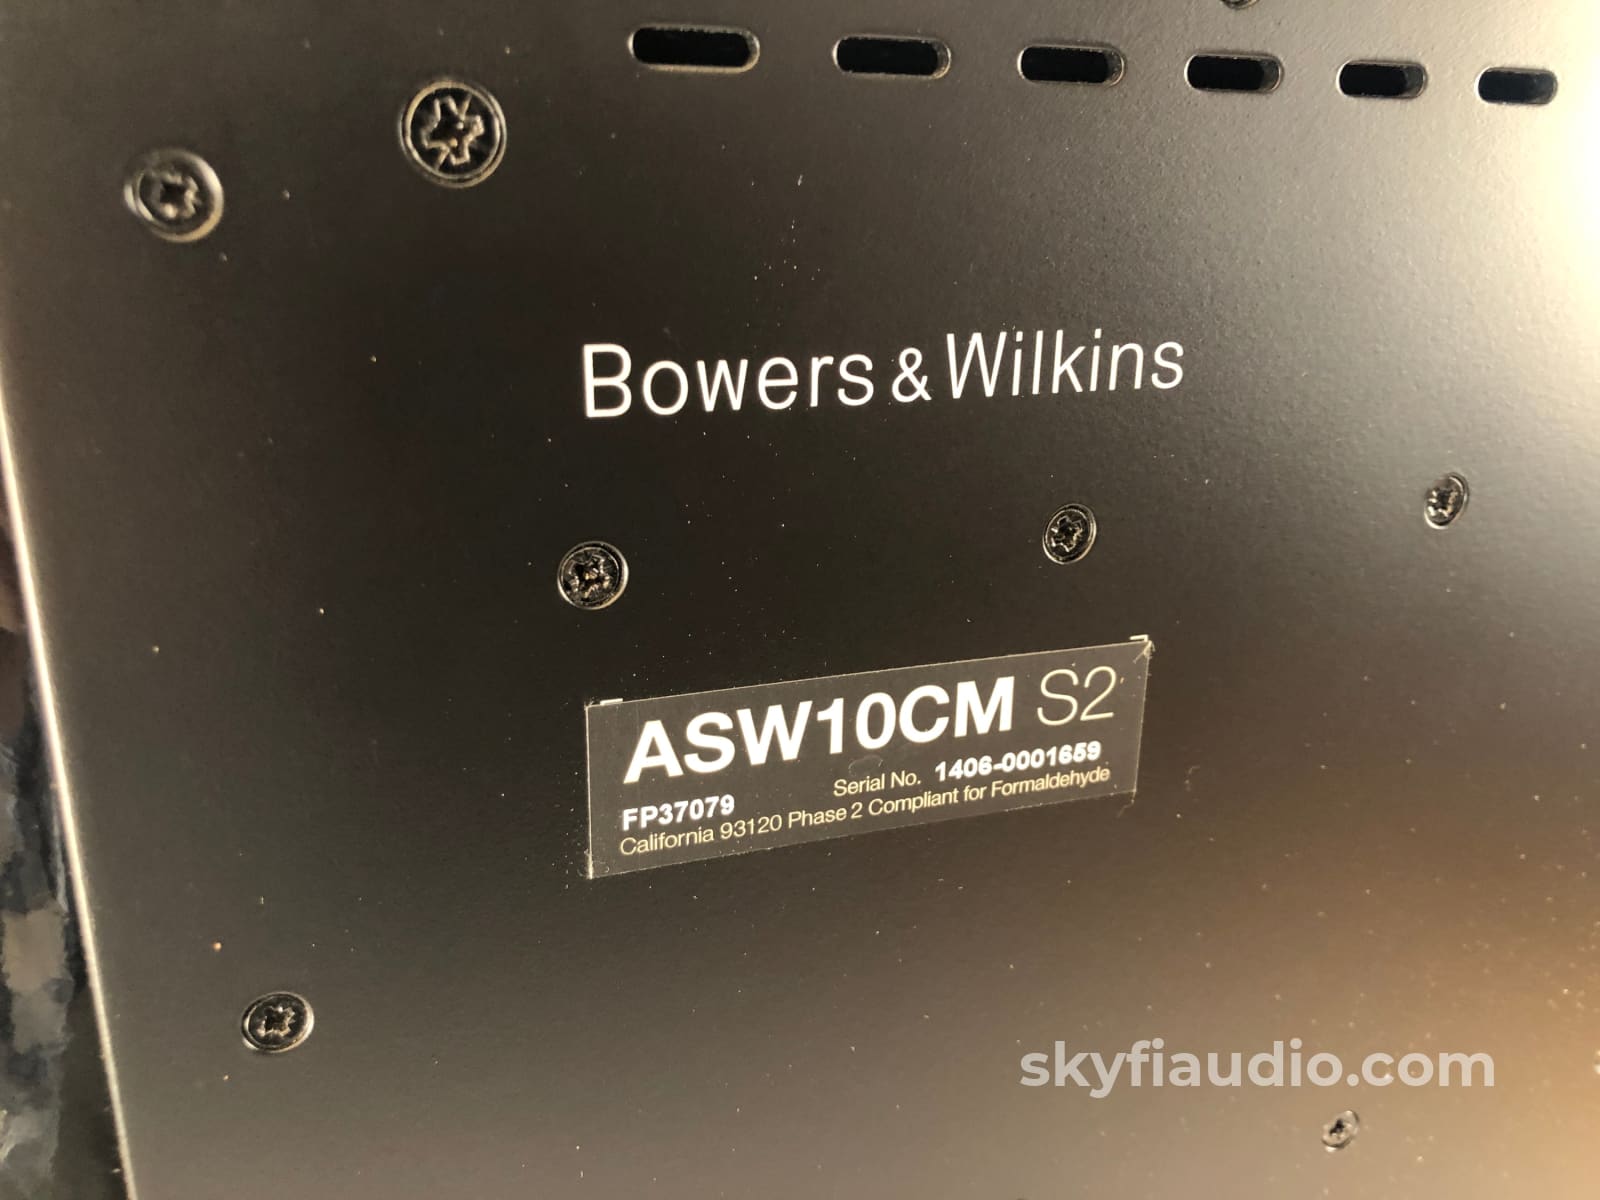 B&W (Bowers & Wilkins) Asw10 Cm S2 Subwoofer (S2 Is The Later Version) - In Gloss Black Speakers